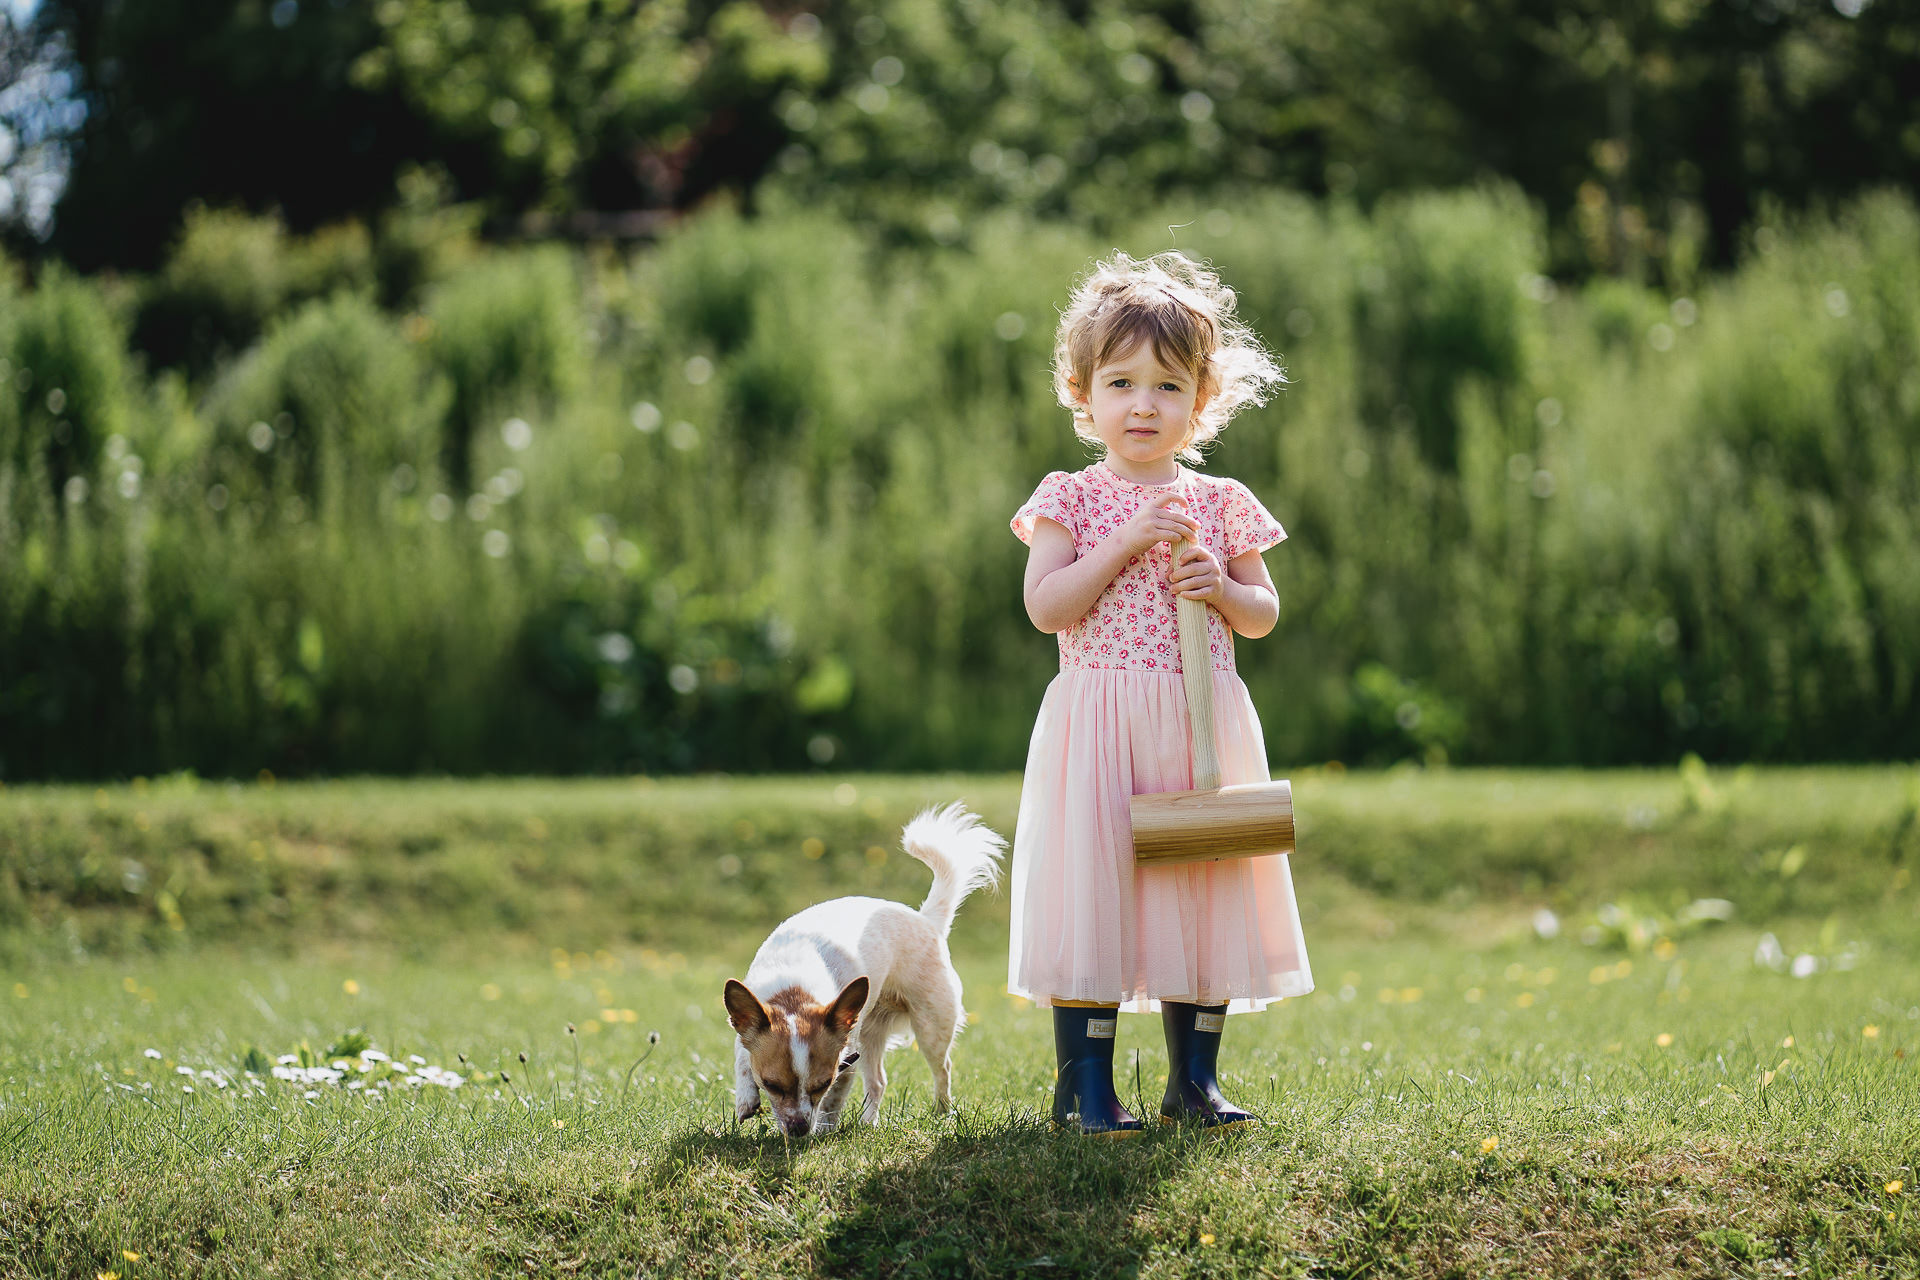 A young girl with a dog on a lawn with a croquet mallet